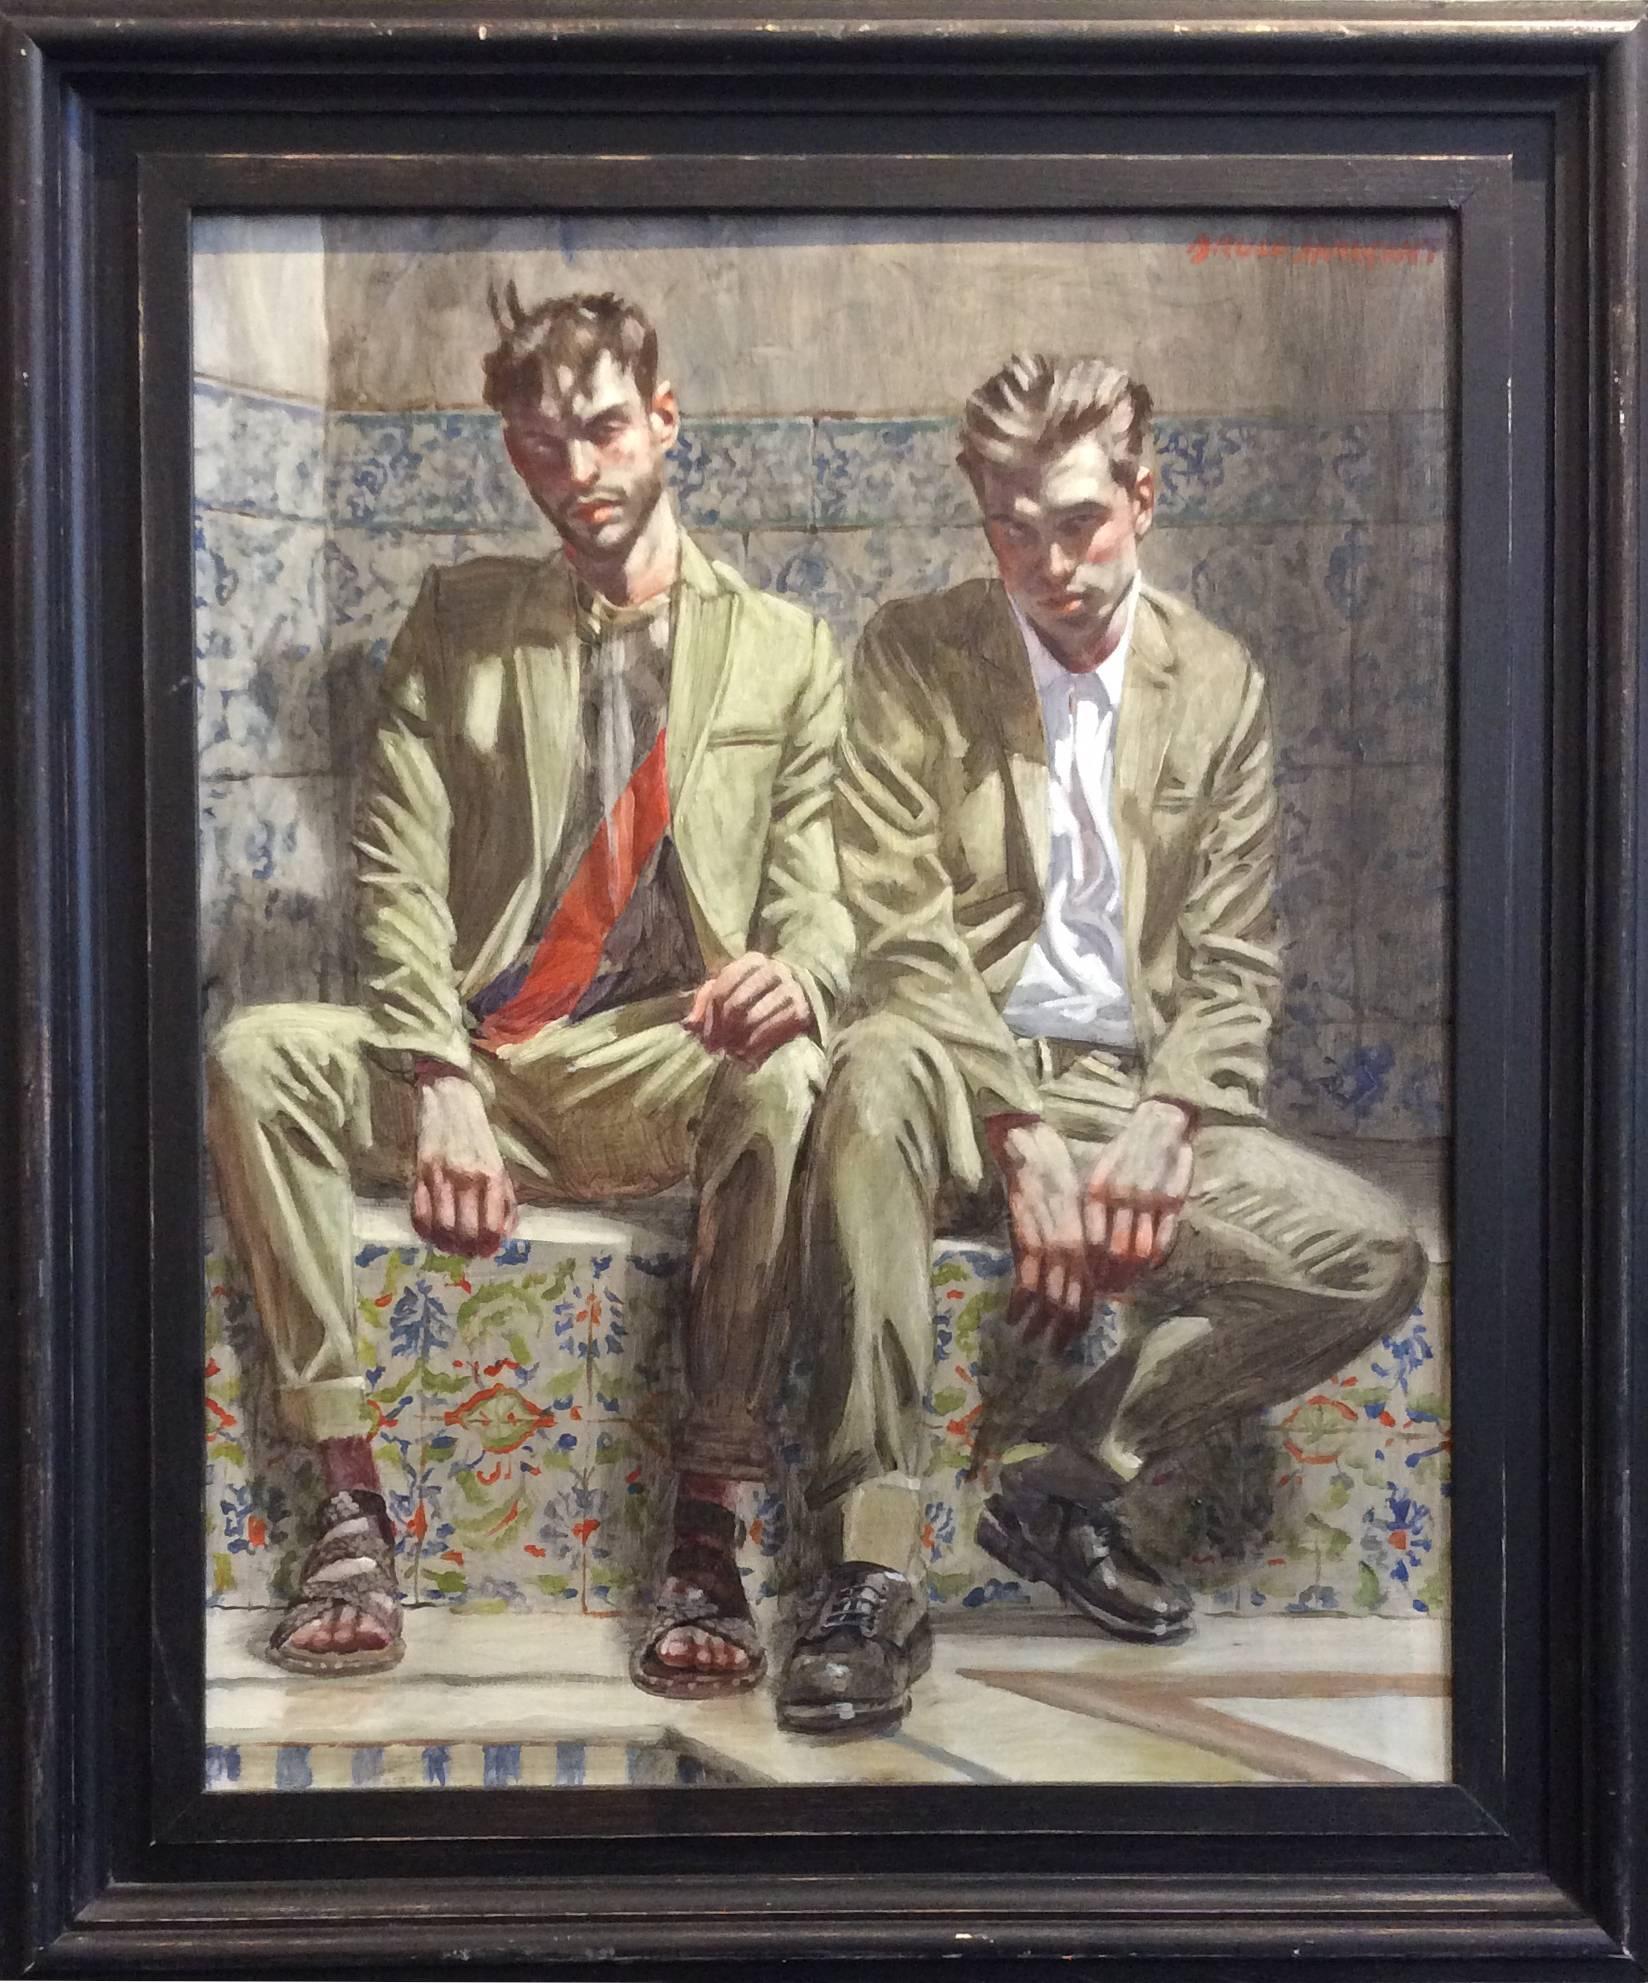 Mark Beard Figurative Painting - Two Men on Painted Tile (Figurative Oil Painting of Two Slouching Men in Suits)